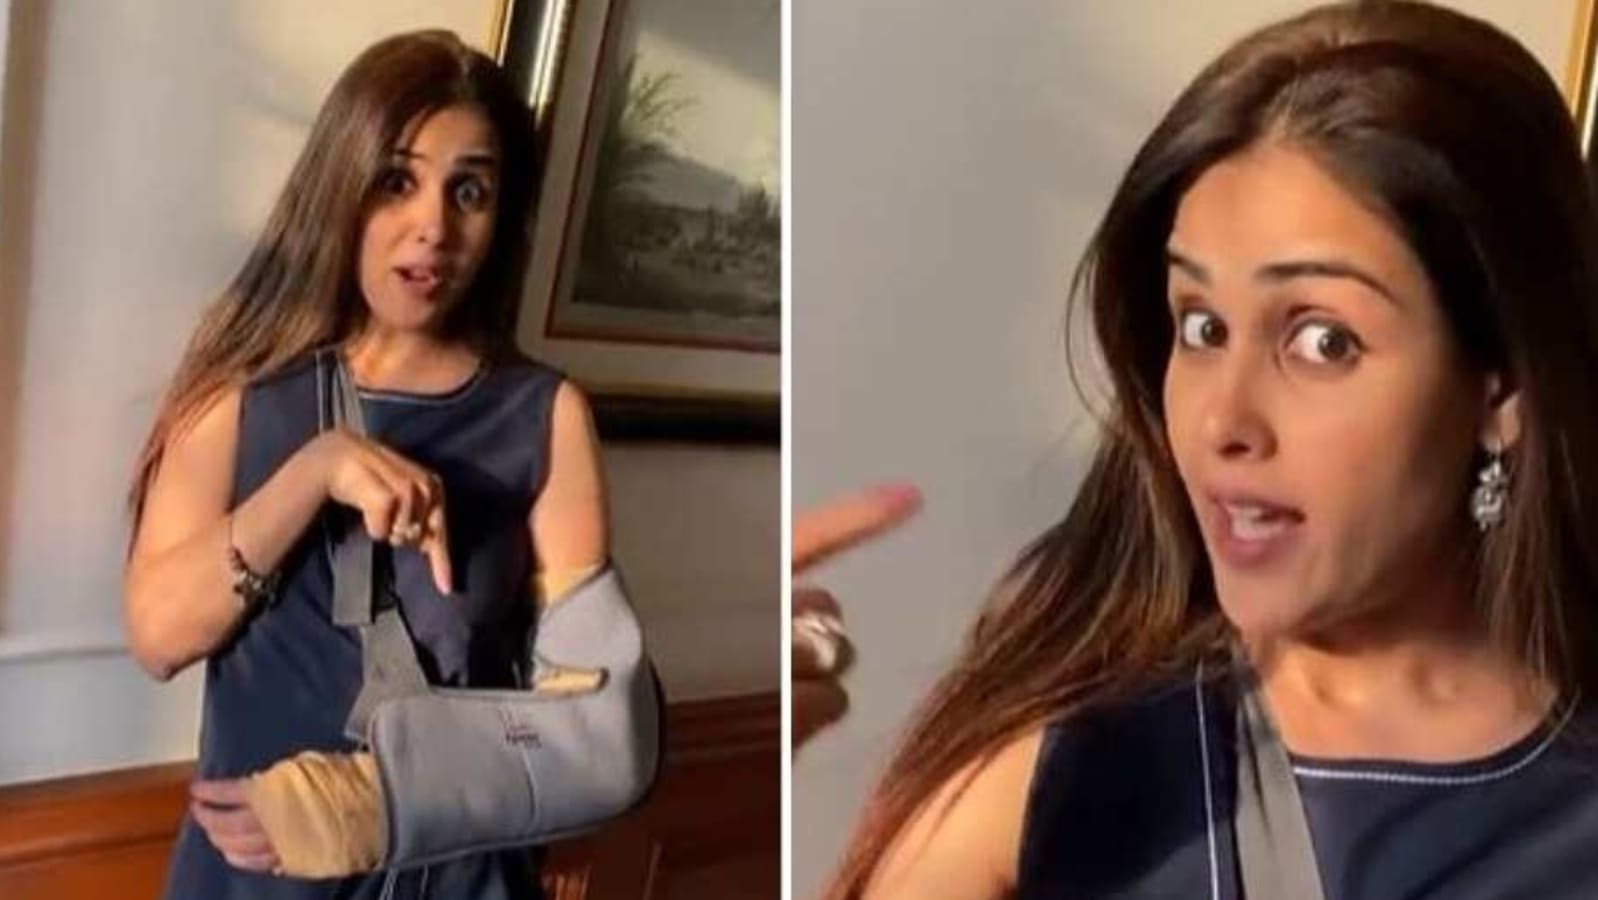 Coming straight from the tent shop': Genelia D'Souza trolled for her  weird outfit, See video